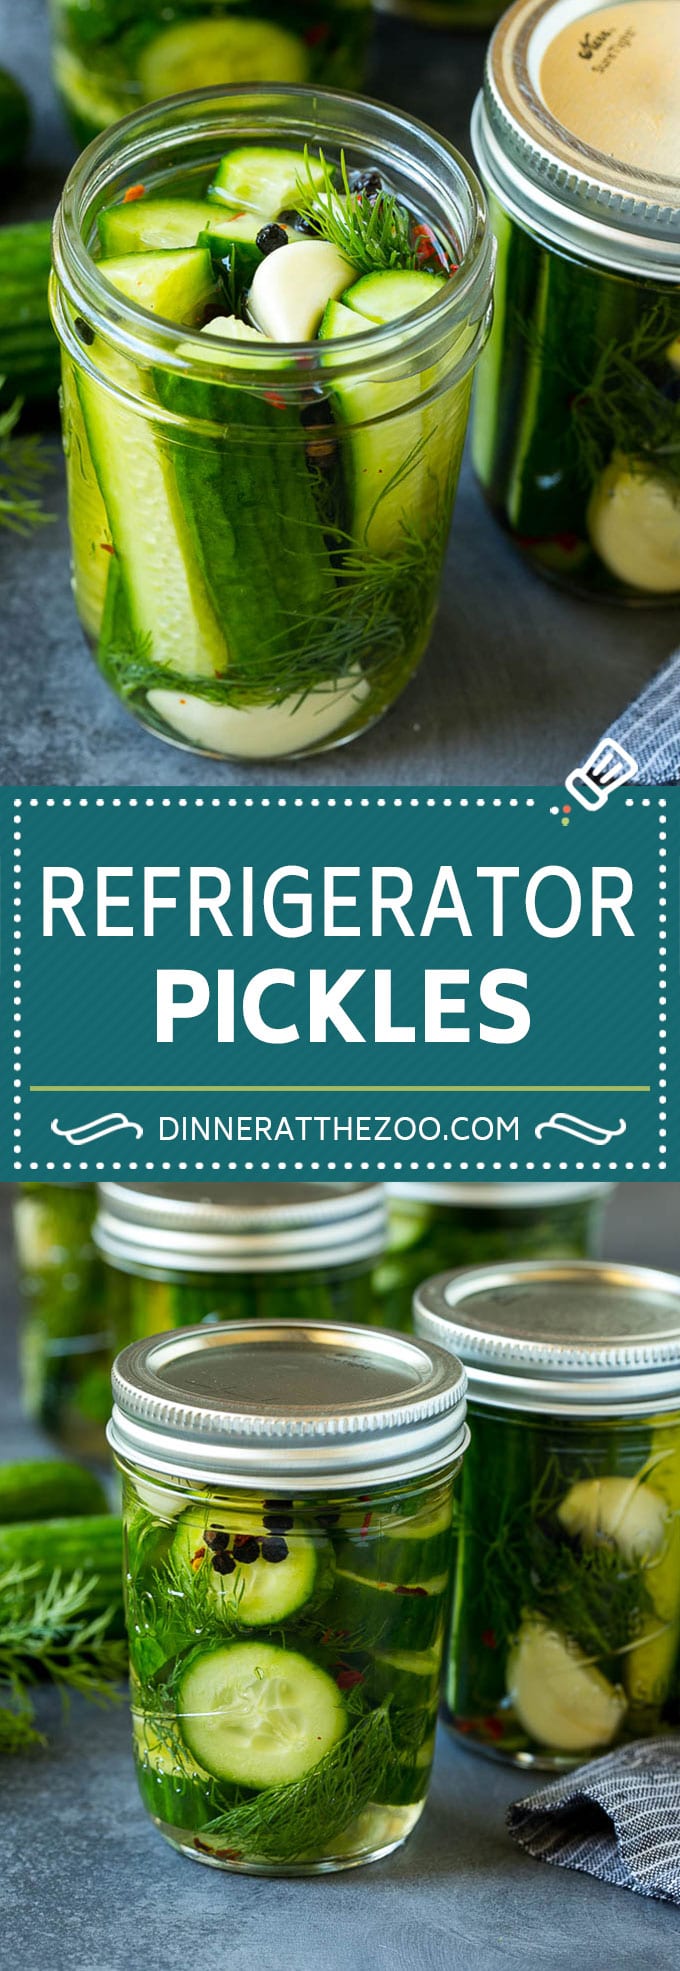 Refrigerator Pickles Recipe | Pickled Cucumbers | Quick Pickles #pickles #cucumbers #garlic #dill #dinneratthezoo